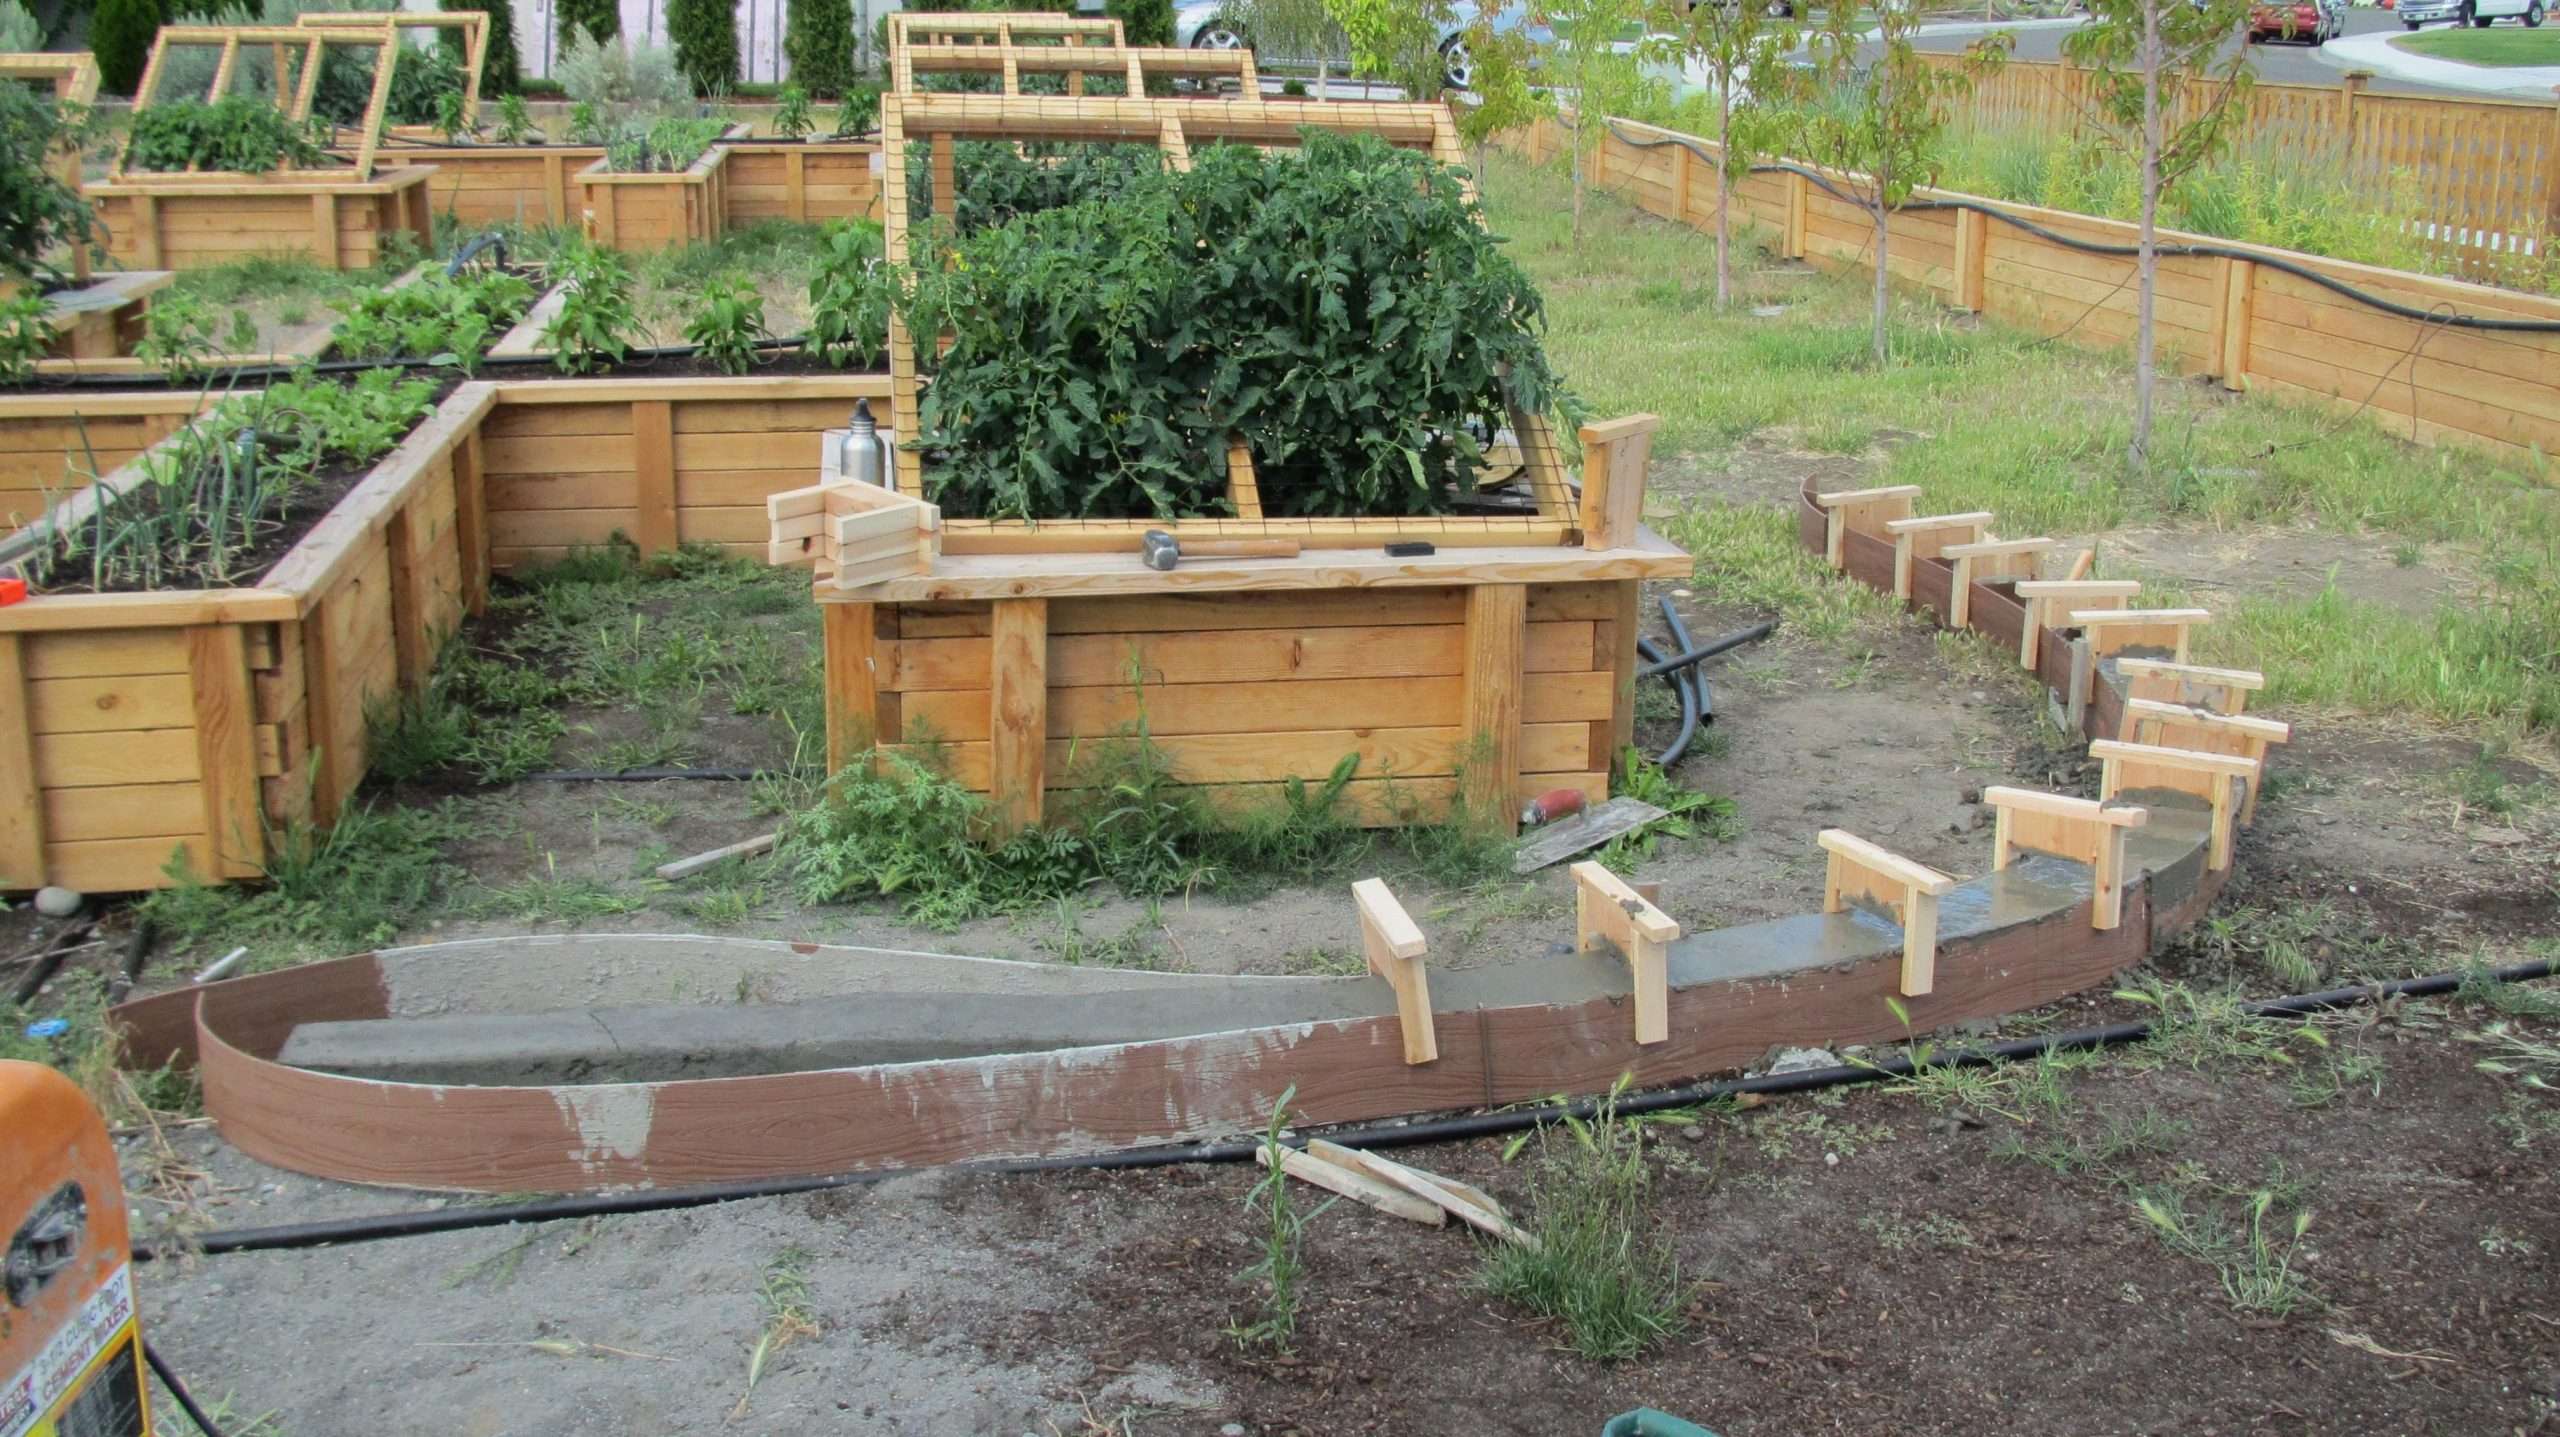 We want to put a curb edging around the raised beds. We ...